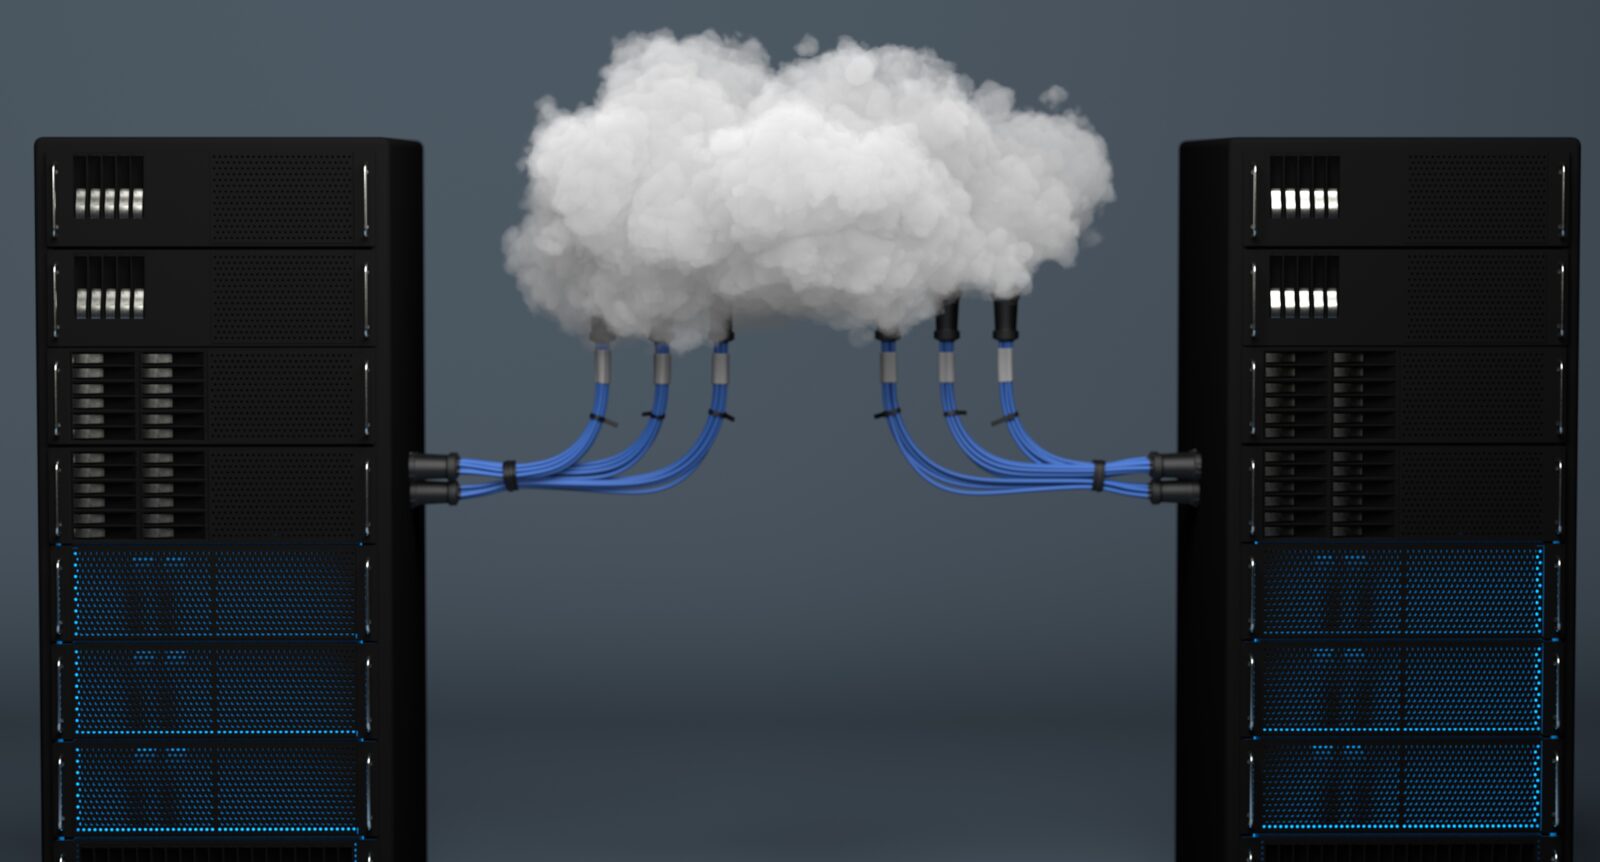 Networks connecting in a cloud